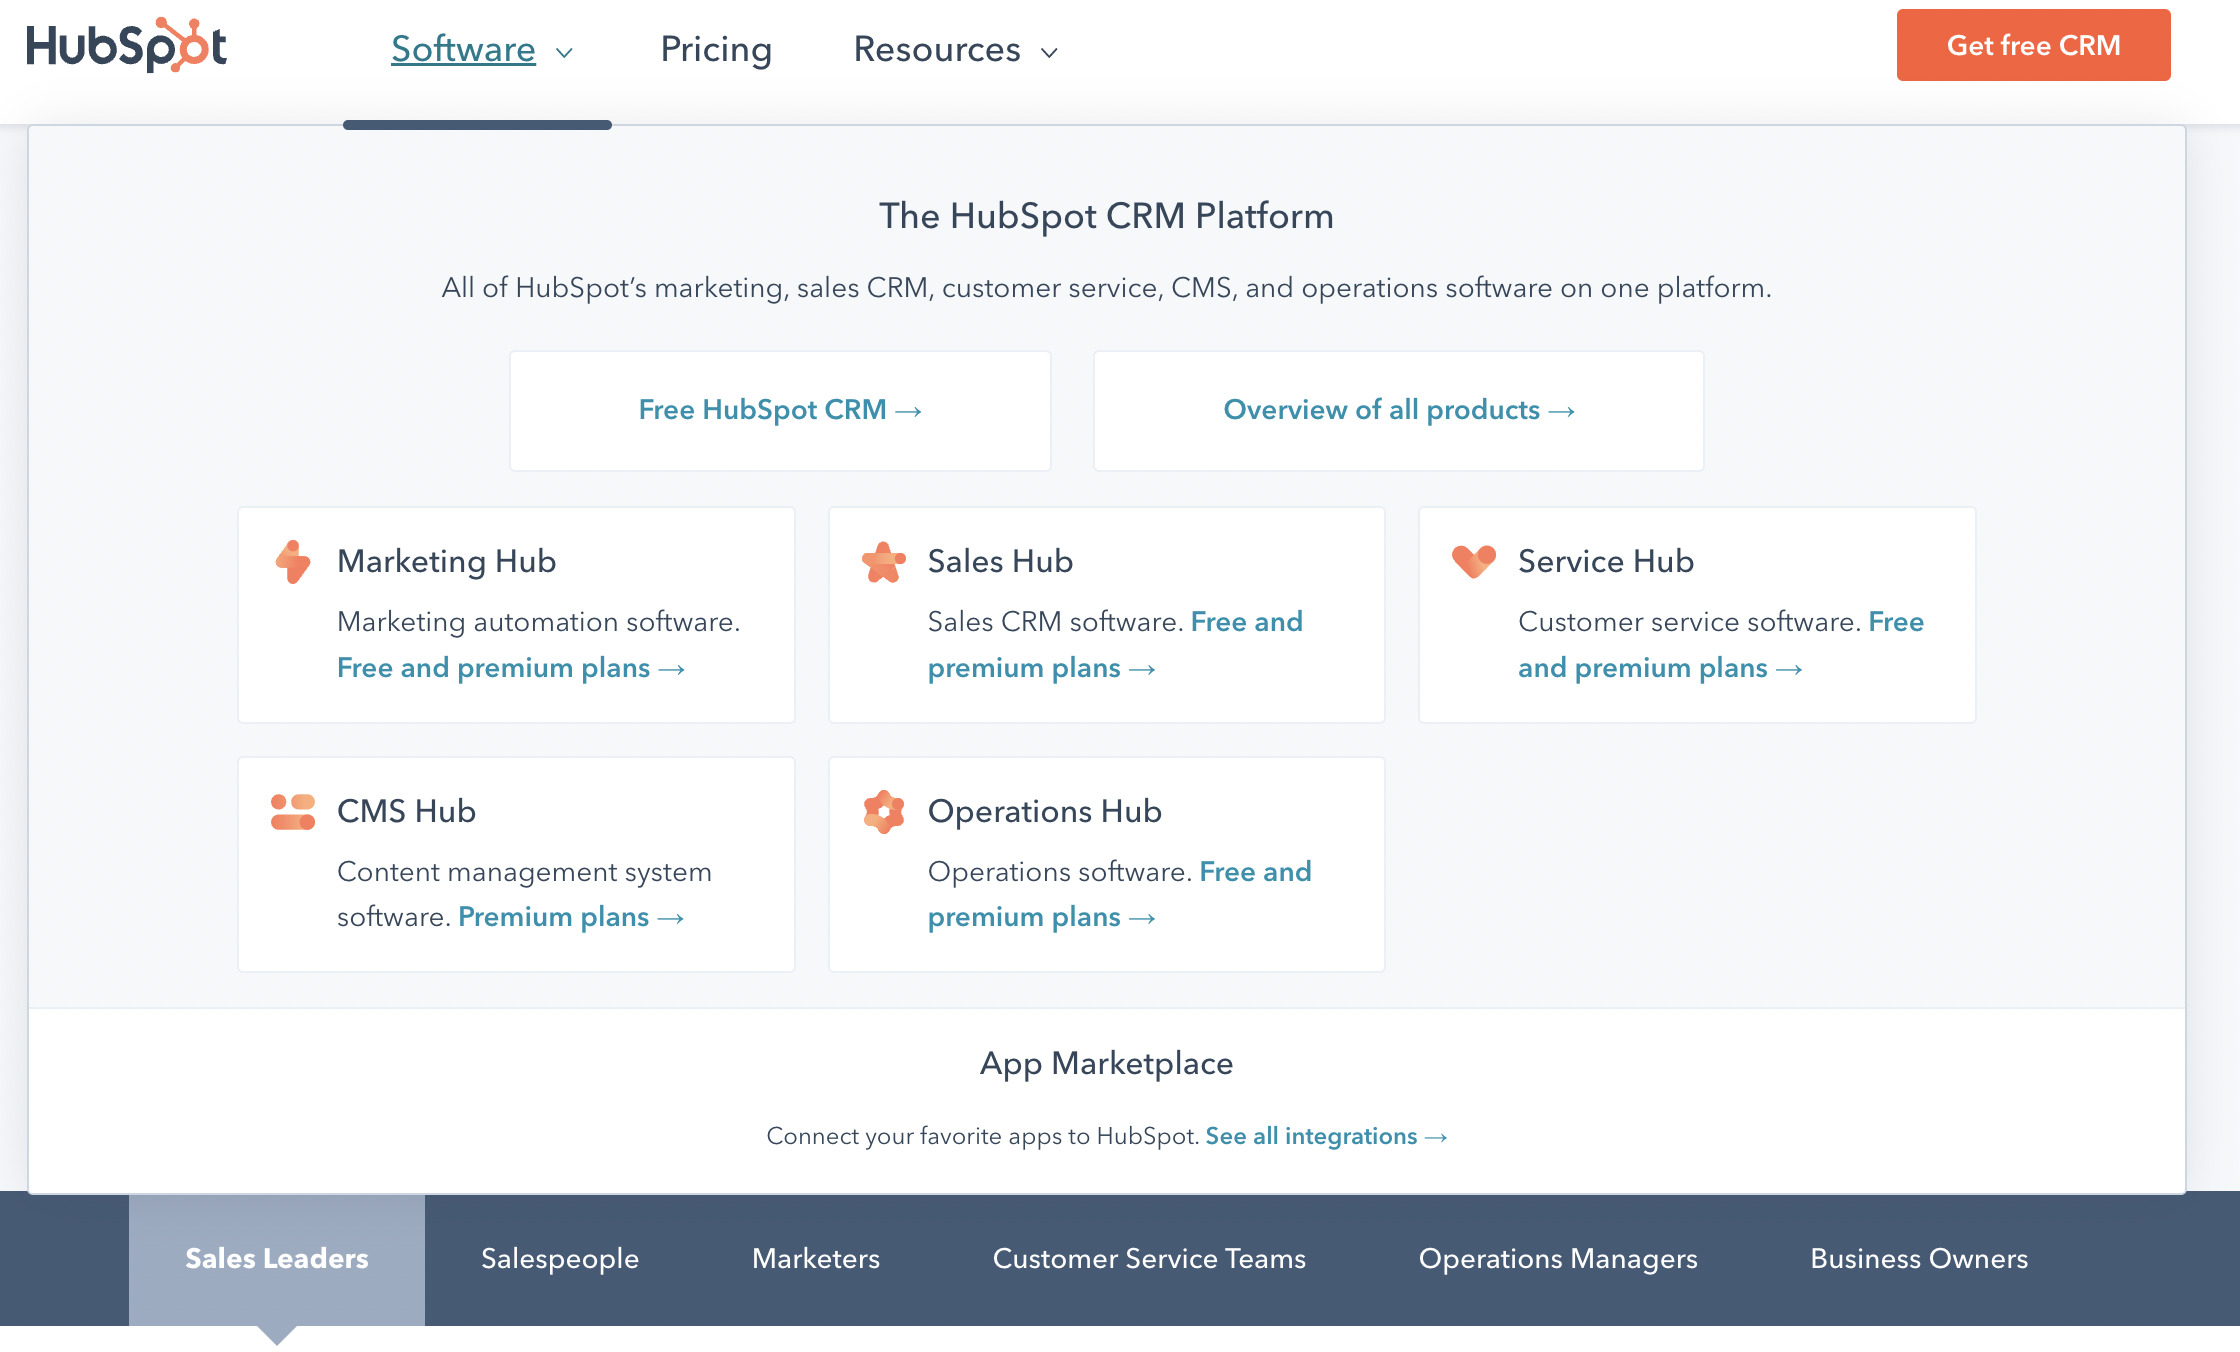 HubSpot’s Information Architecture as a Good SaaS Design Practice